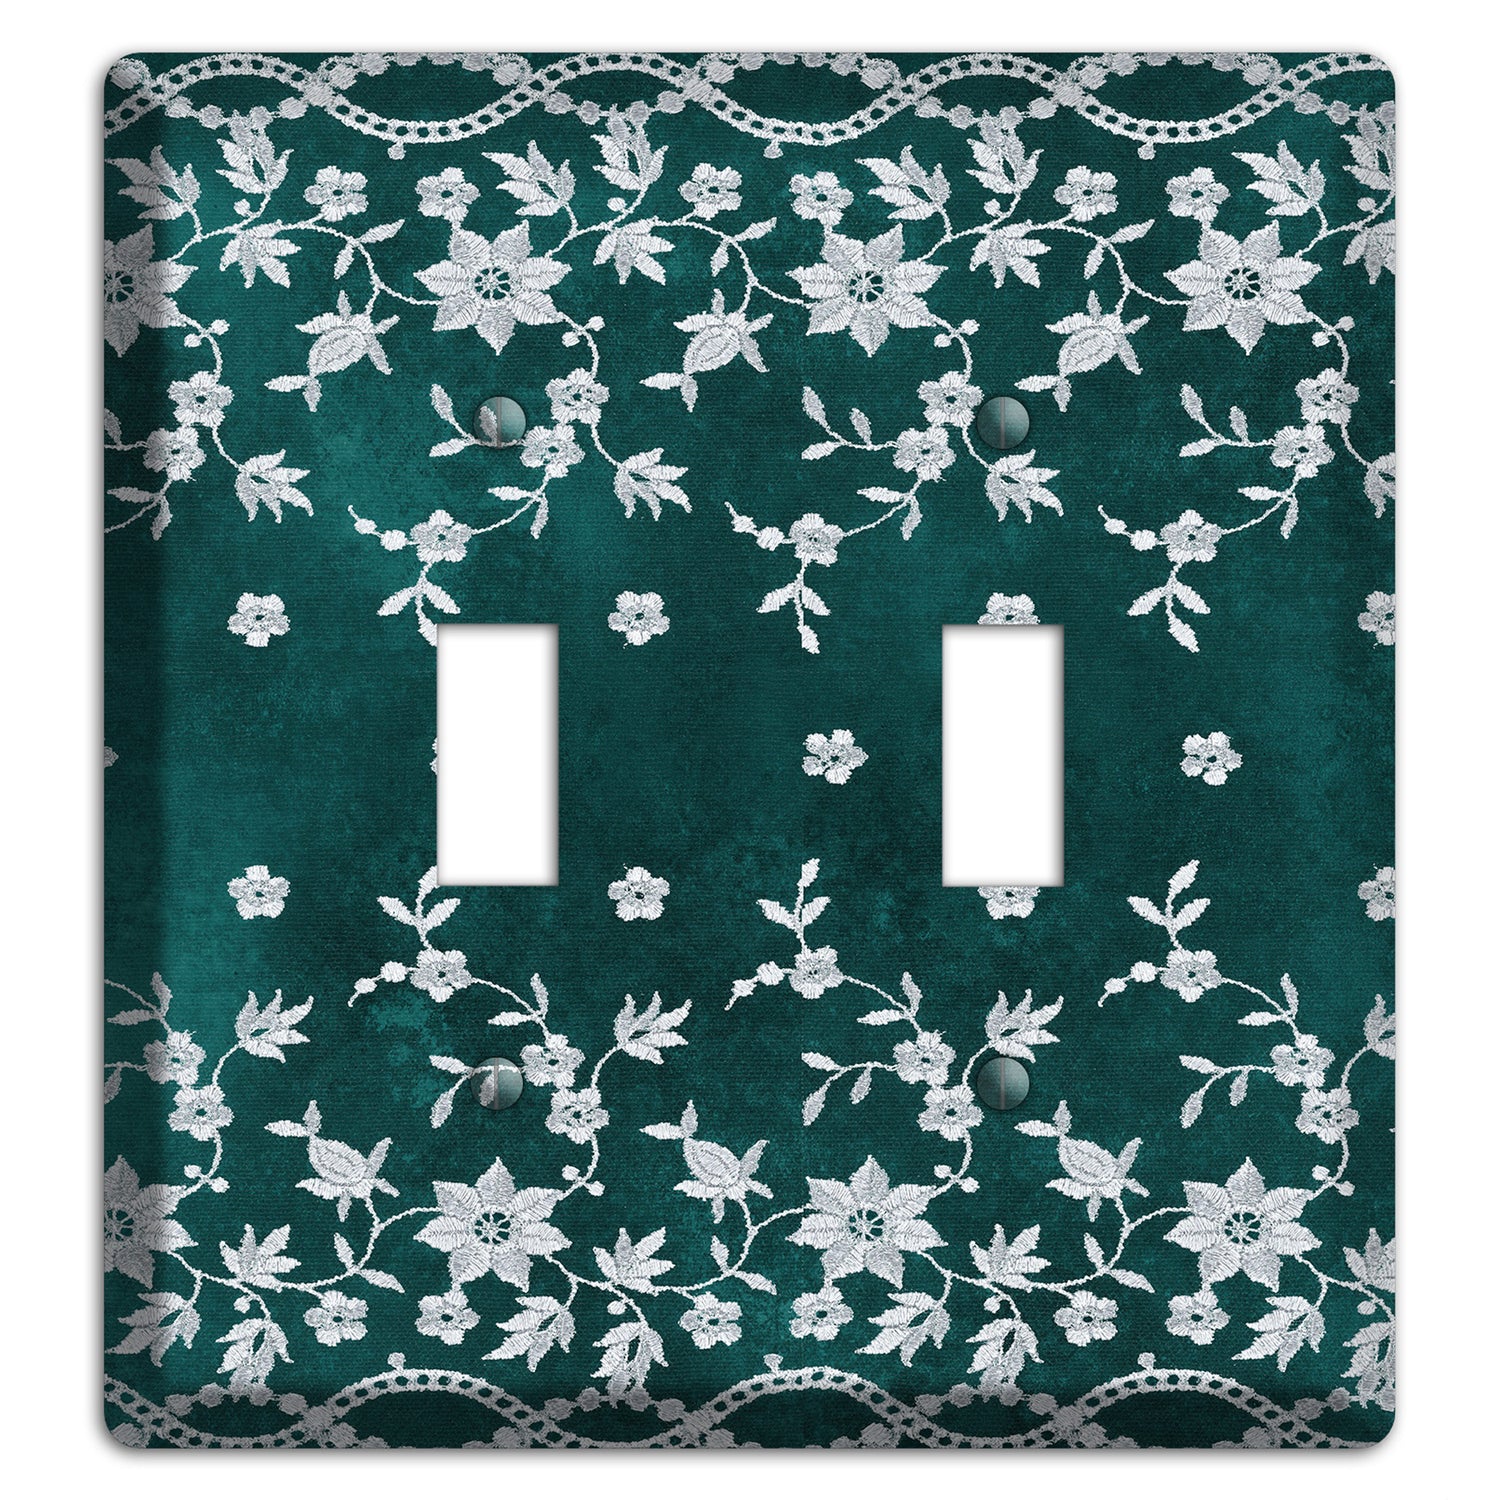 Embroidered Floral Teal 2 Toggle Wallplate